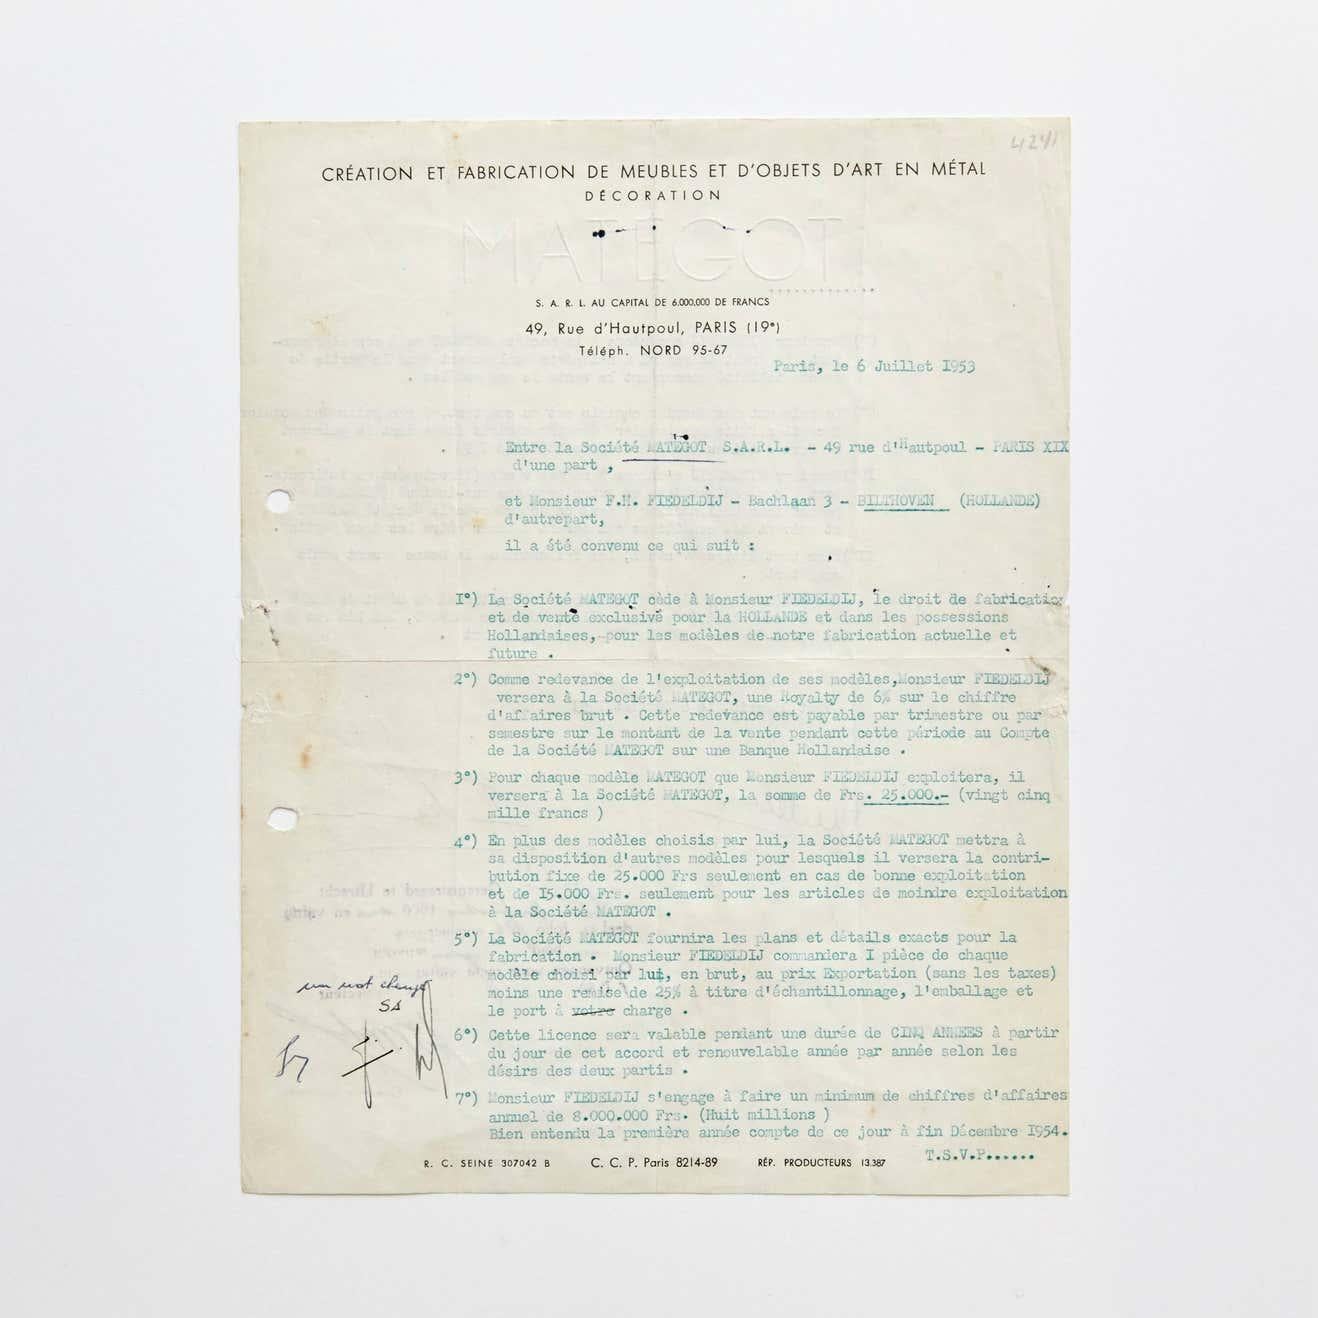 Contract between Matheiu Matégot and Artimeta International for the production in Holland of different pieces by Matheiu Matégot.

Measures: 21 x 27 cm each page.

In good original condition, with wear consistent with age and use, preserving a